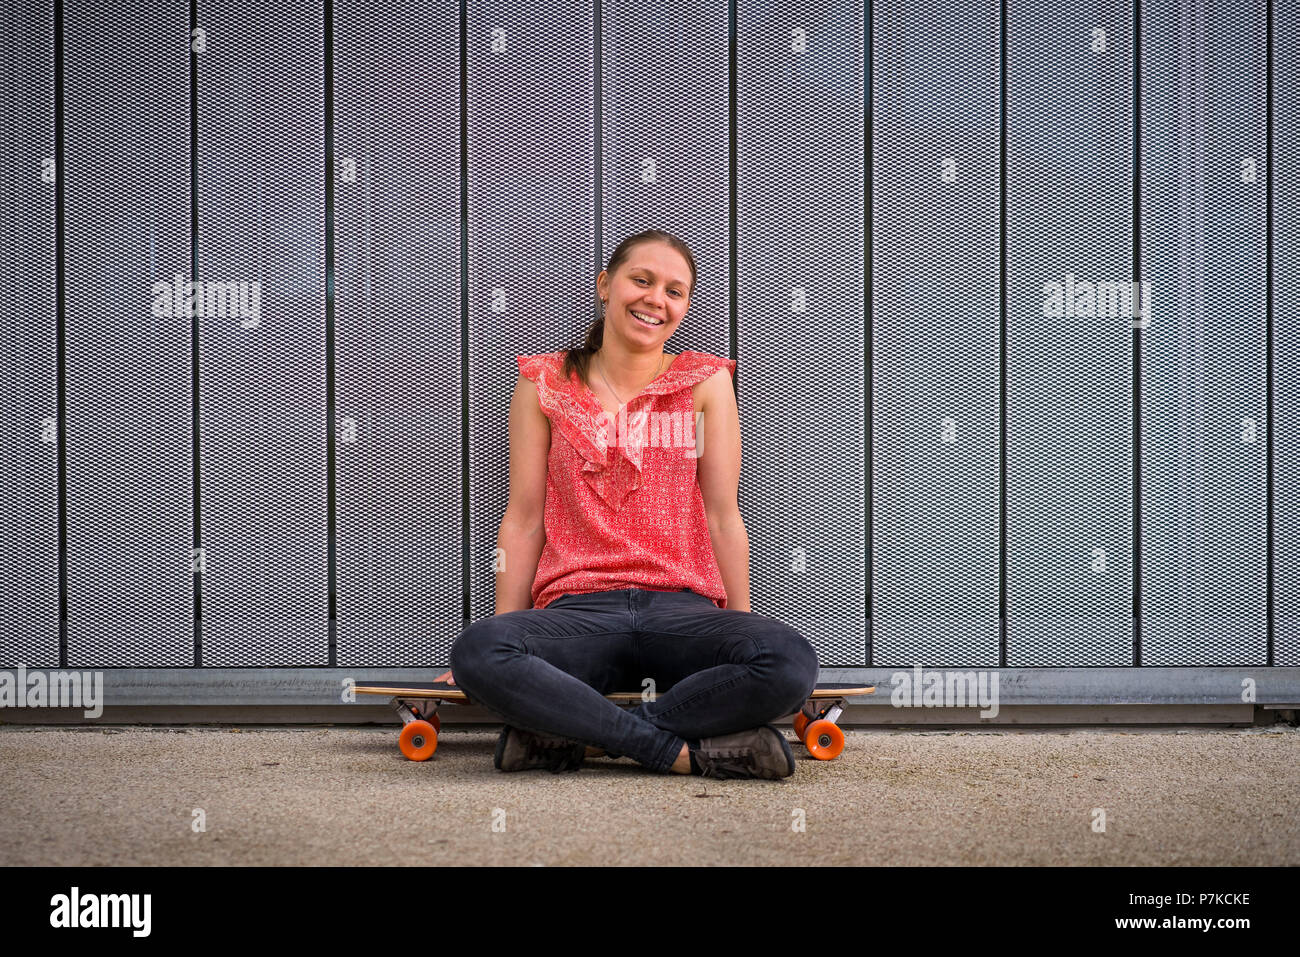 Woman with longboard, 23 years old, portrait, urban environment Stock Photo